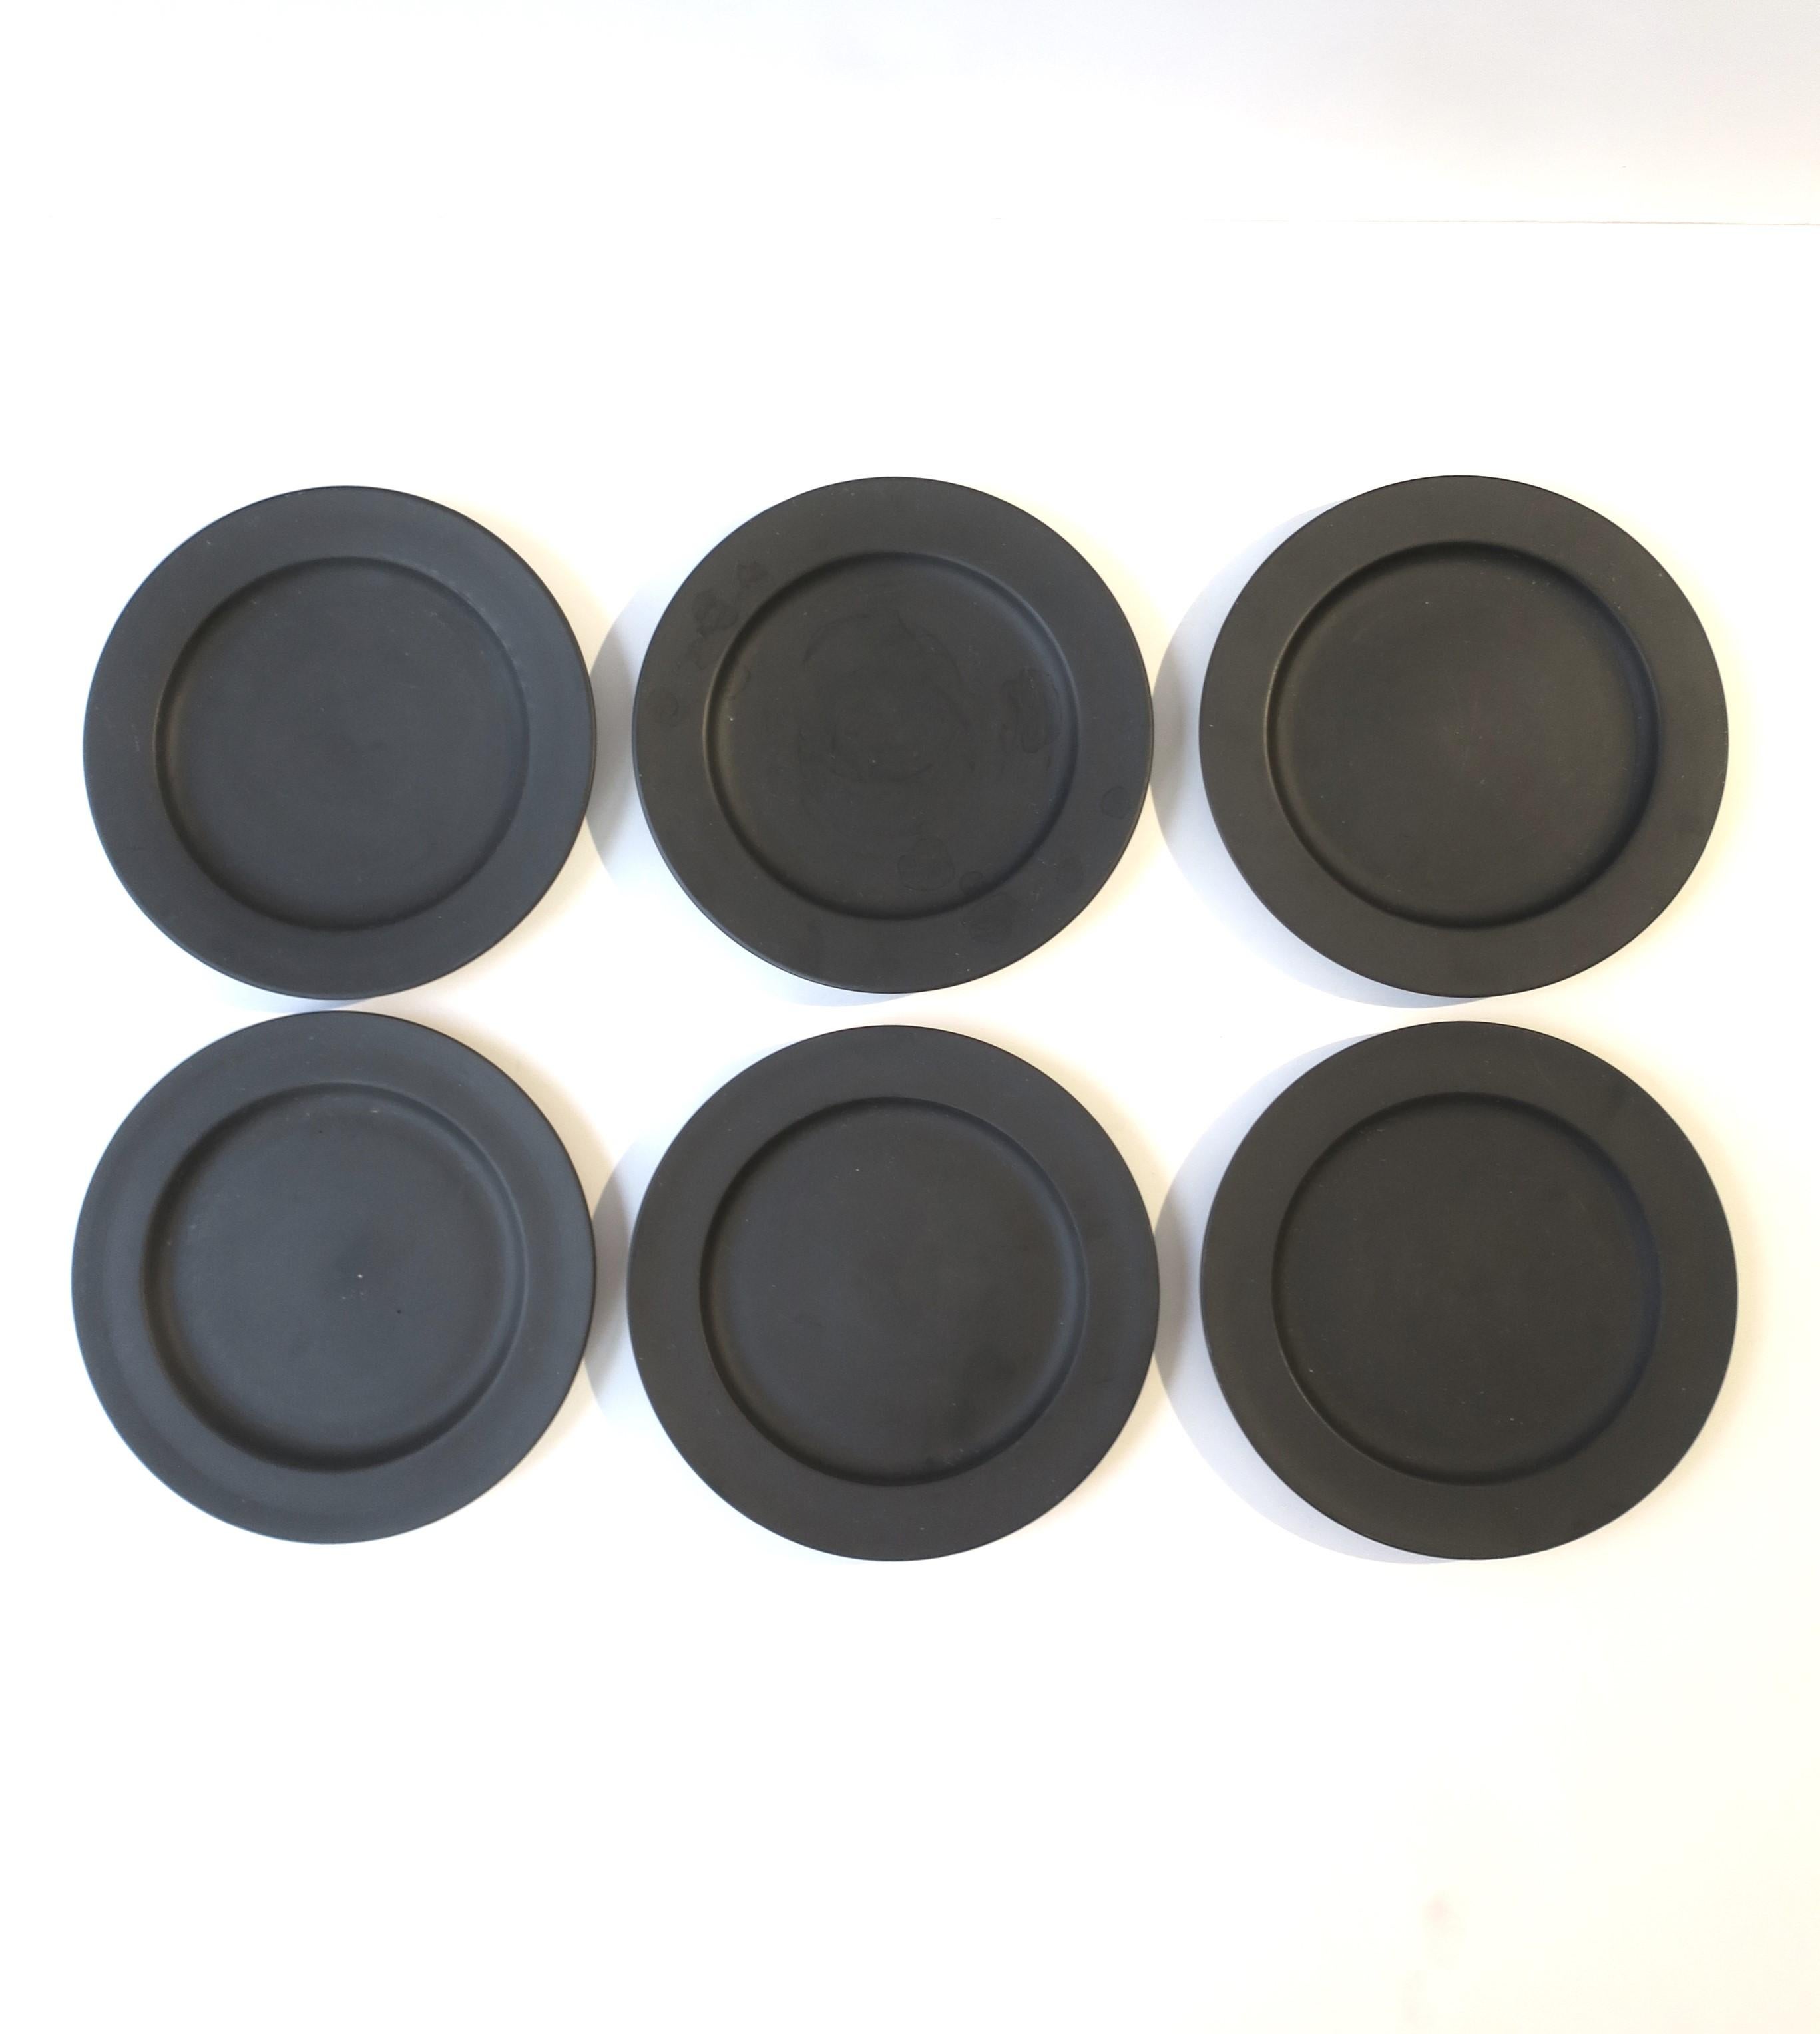 A beautiful set of six (6) English black basalt plates by Wedgwood, circa early to mid-20th century, England. Plates could be used a myriad of ways (appetizer plates, dessert, etc., or decorative on a wall.) With maker's mark on bottom of all six